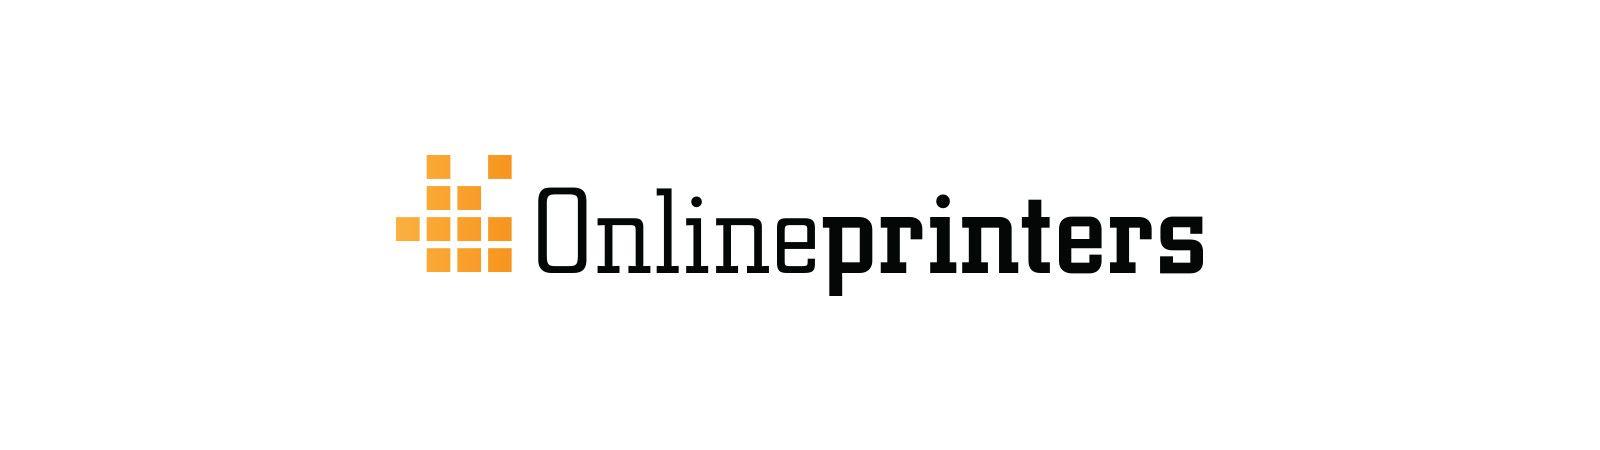 Online Printing Logo - Onlineprinters. Business Services Sector. TA. A Private Equity Firm